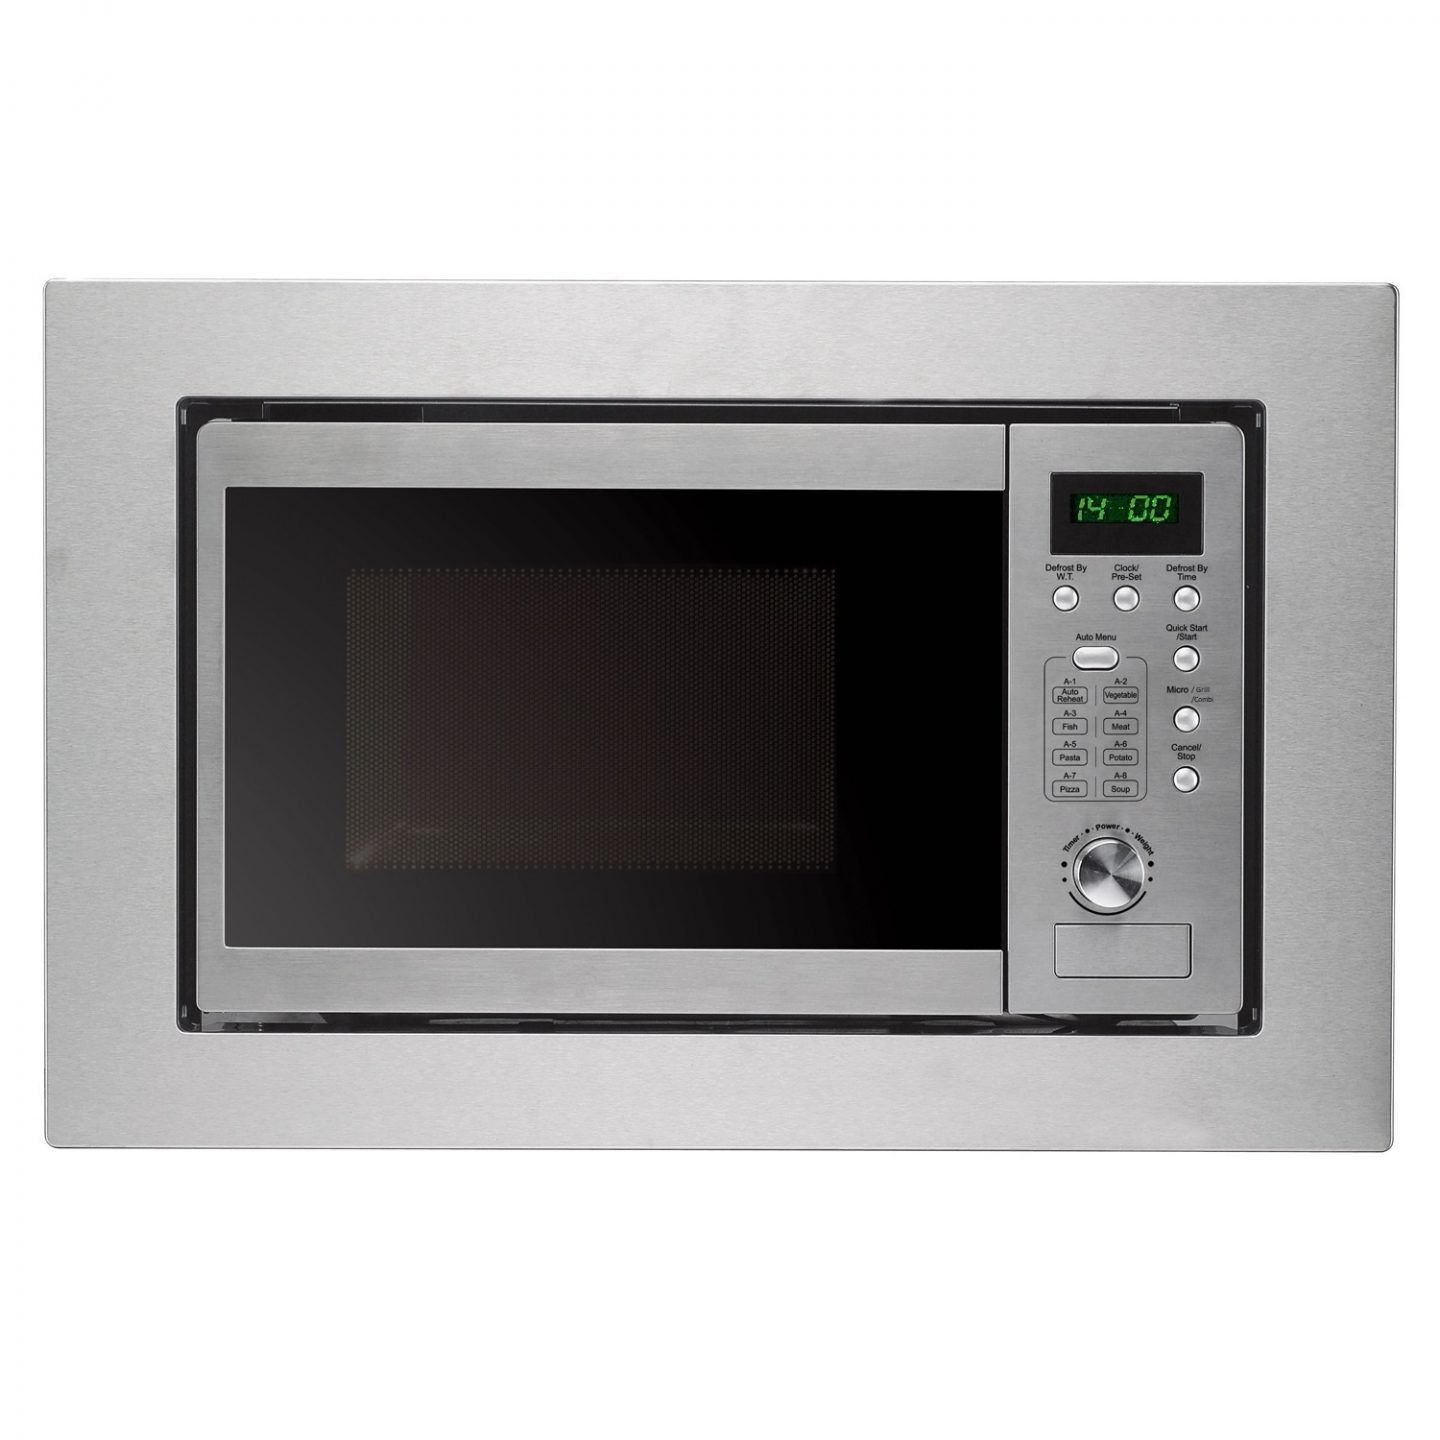 Cookology 20L Integrated Microwave and Grill - Stainless Steel